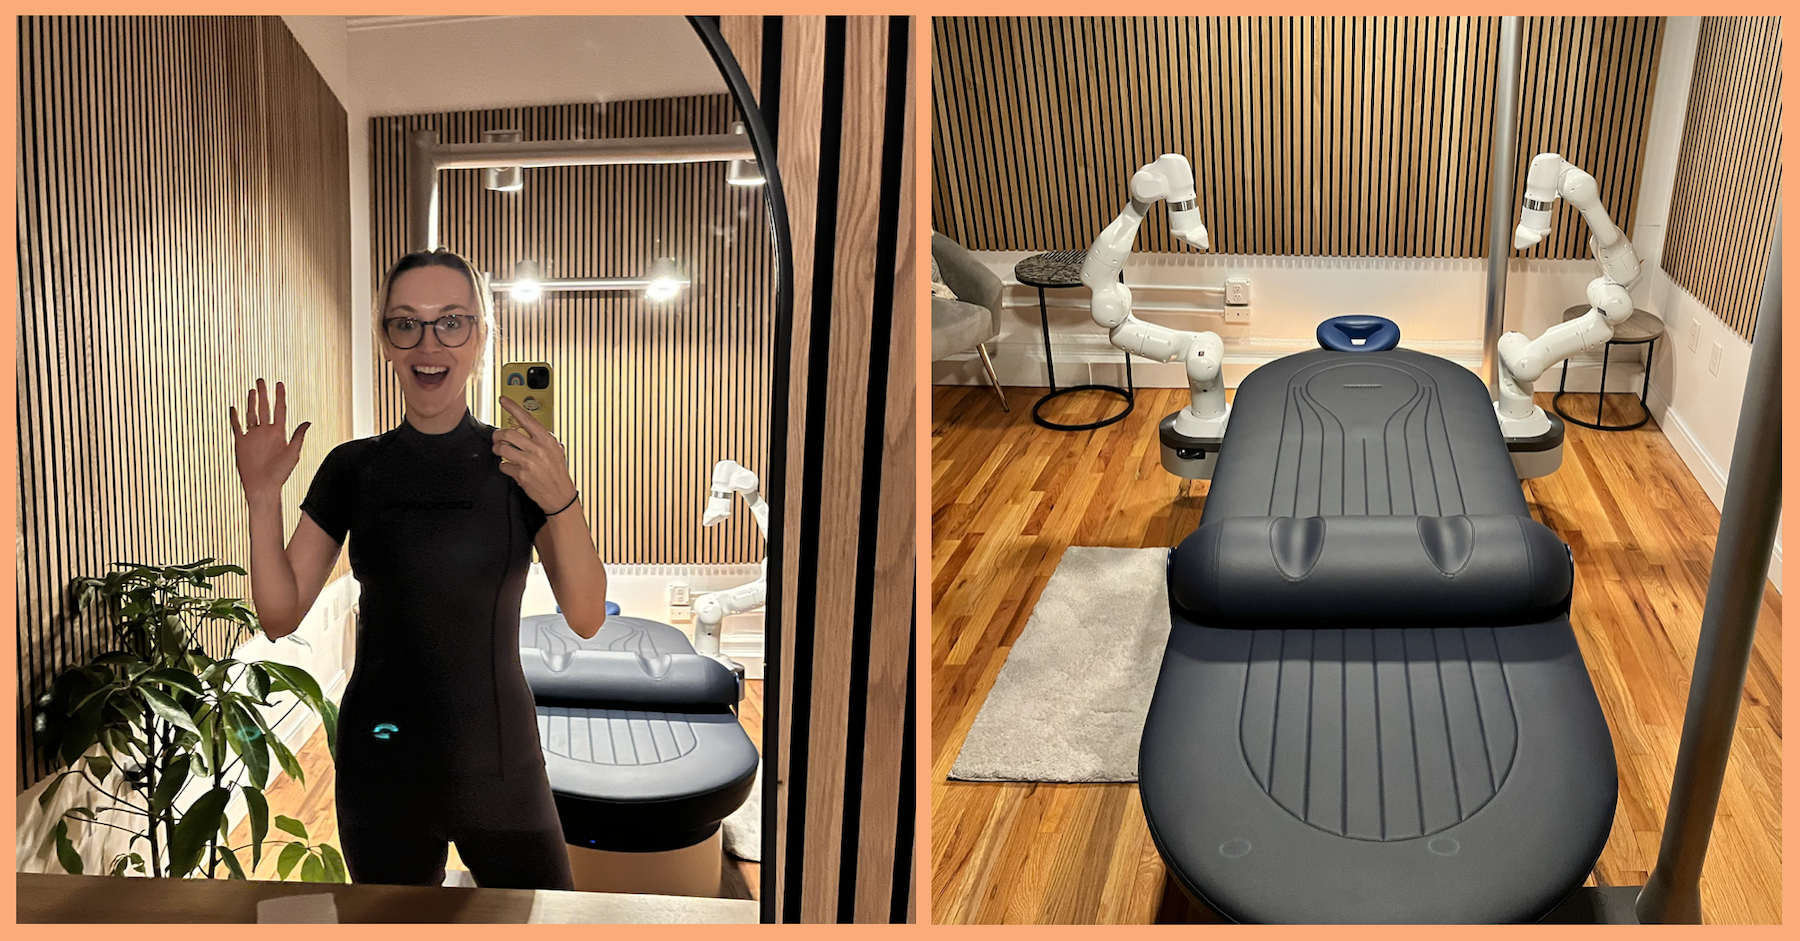 two photos: one of a woman in tight workout clothes and a massage table with white robot arms